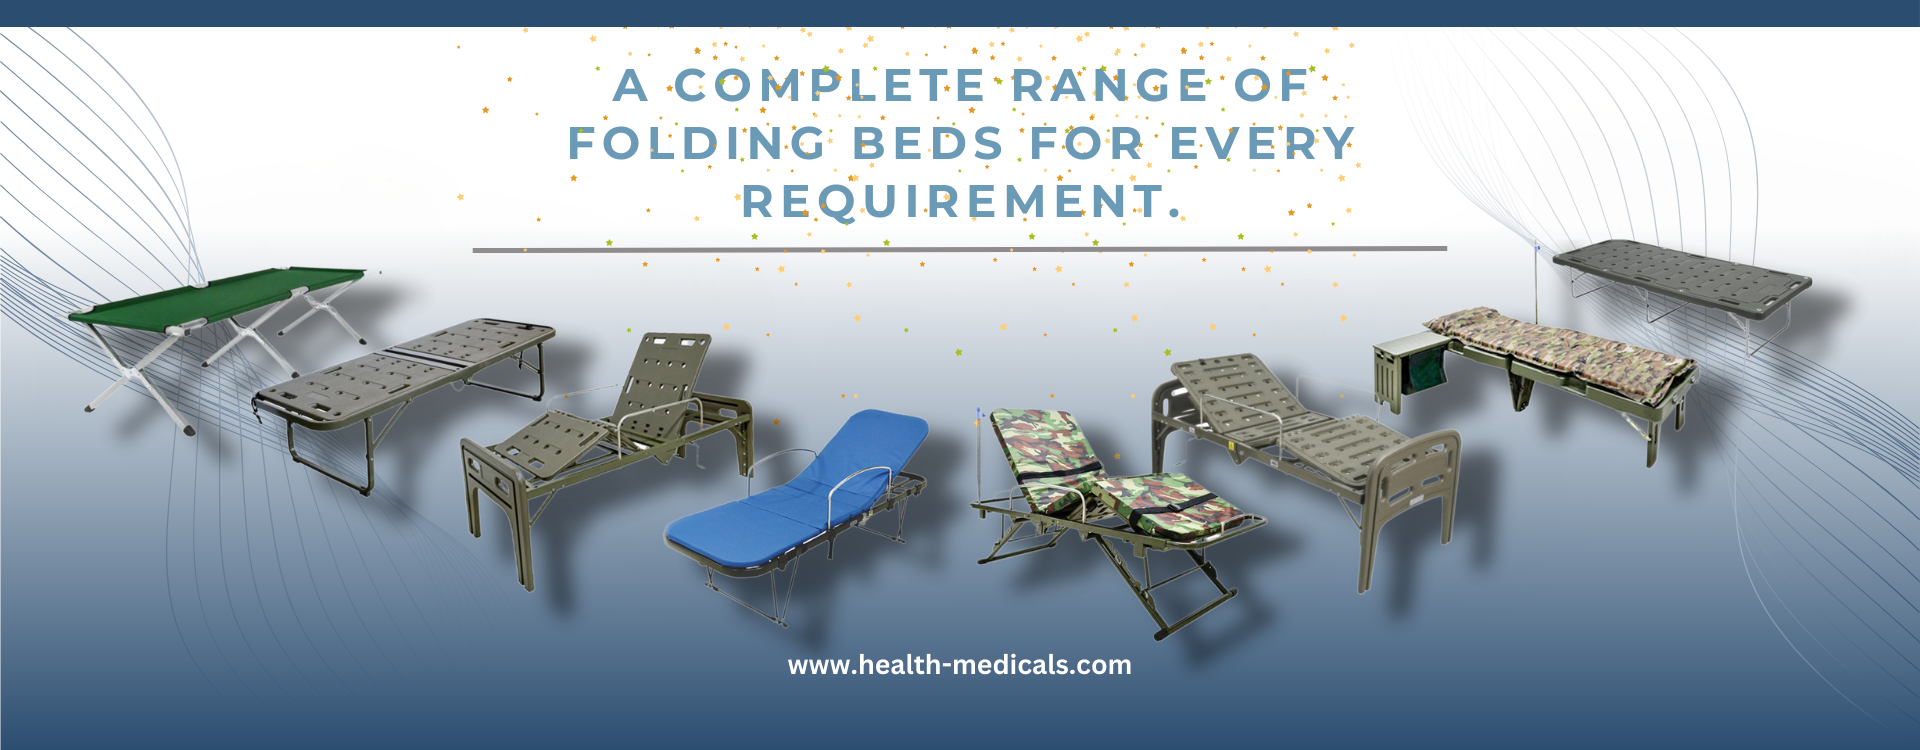 Full folding bed series to cover different needs